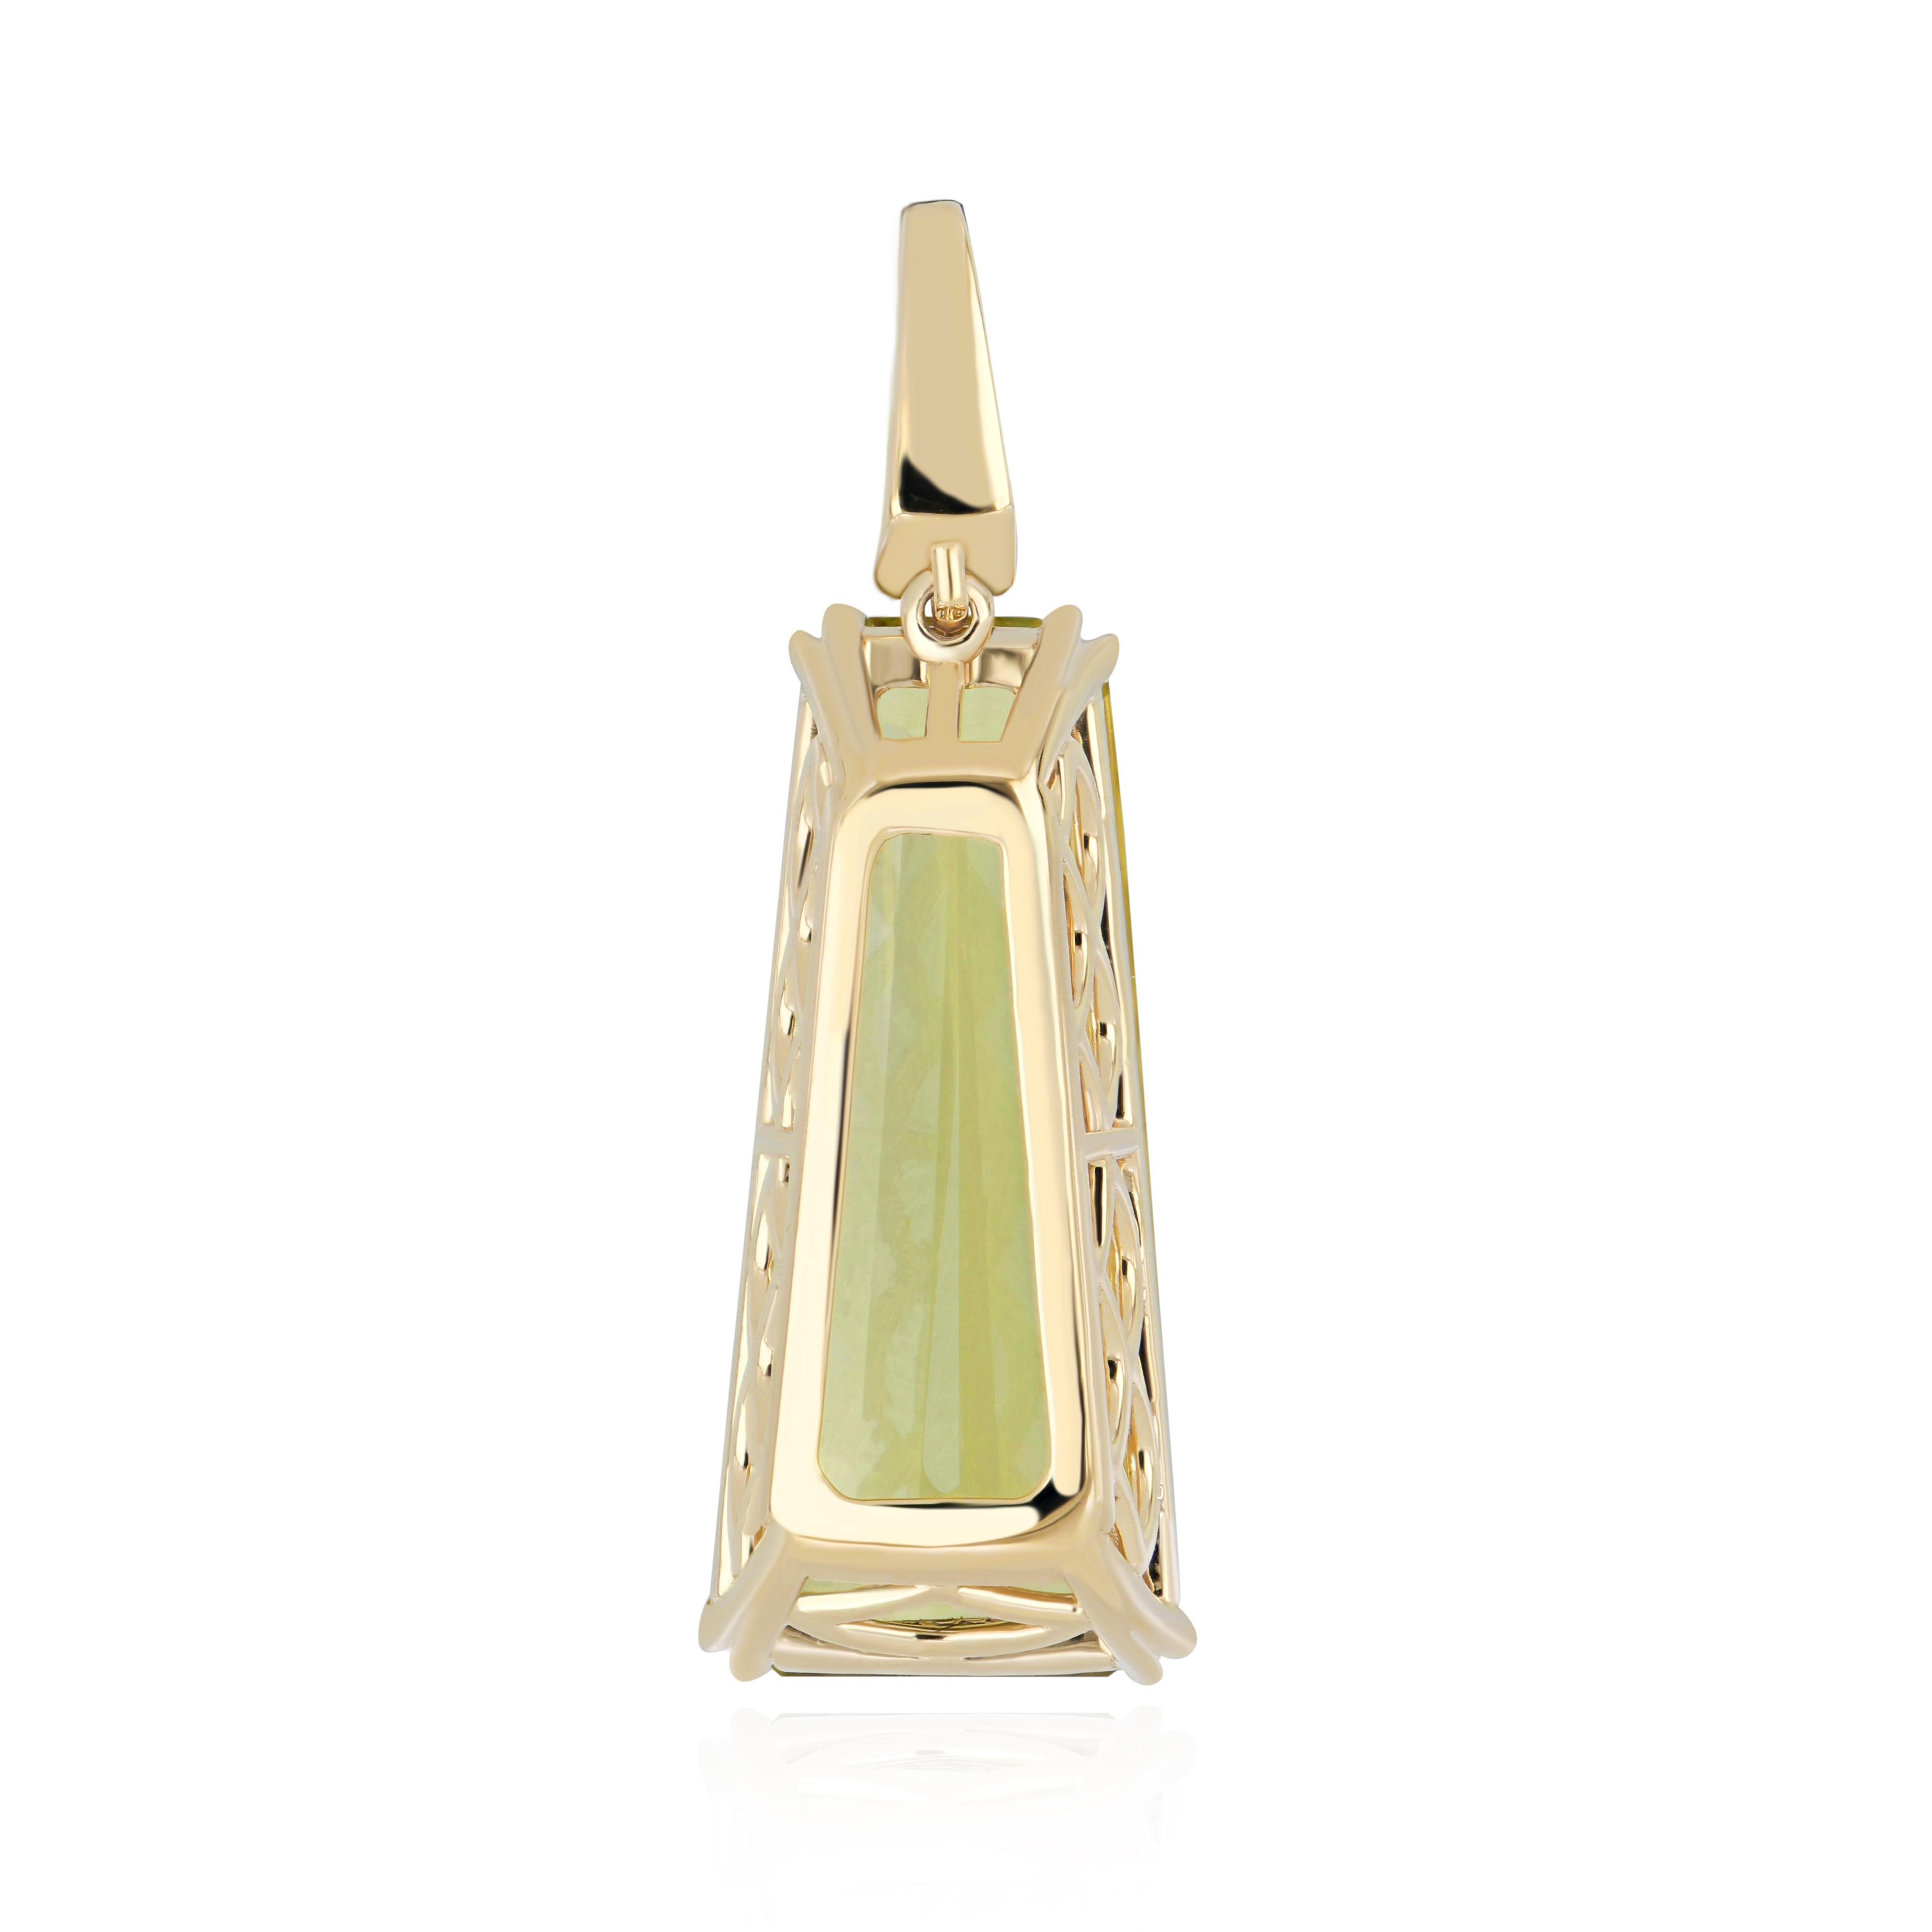 Indulge in Timeless Luxury: A Masterpiece of Craftsmanship, This 18 Karat Yellow Gold Pendant Radiates Elegance, Showcasing a Captivating 8.85Cts (approx.) Fancy-Cut Lemon Quartz as its Centerpiece, Embellished with Micro-Pave Diamonds Weighing